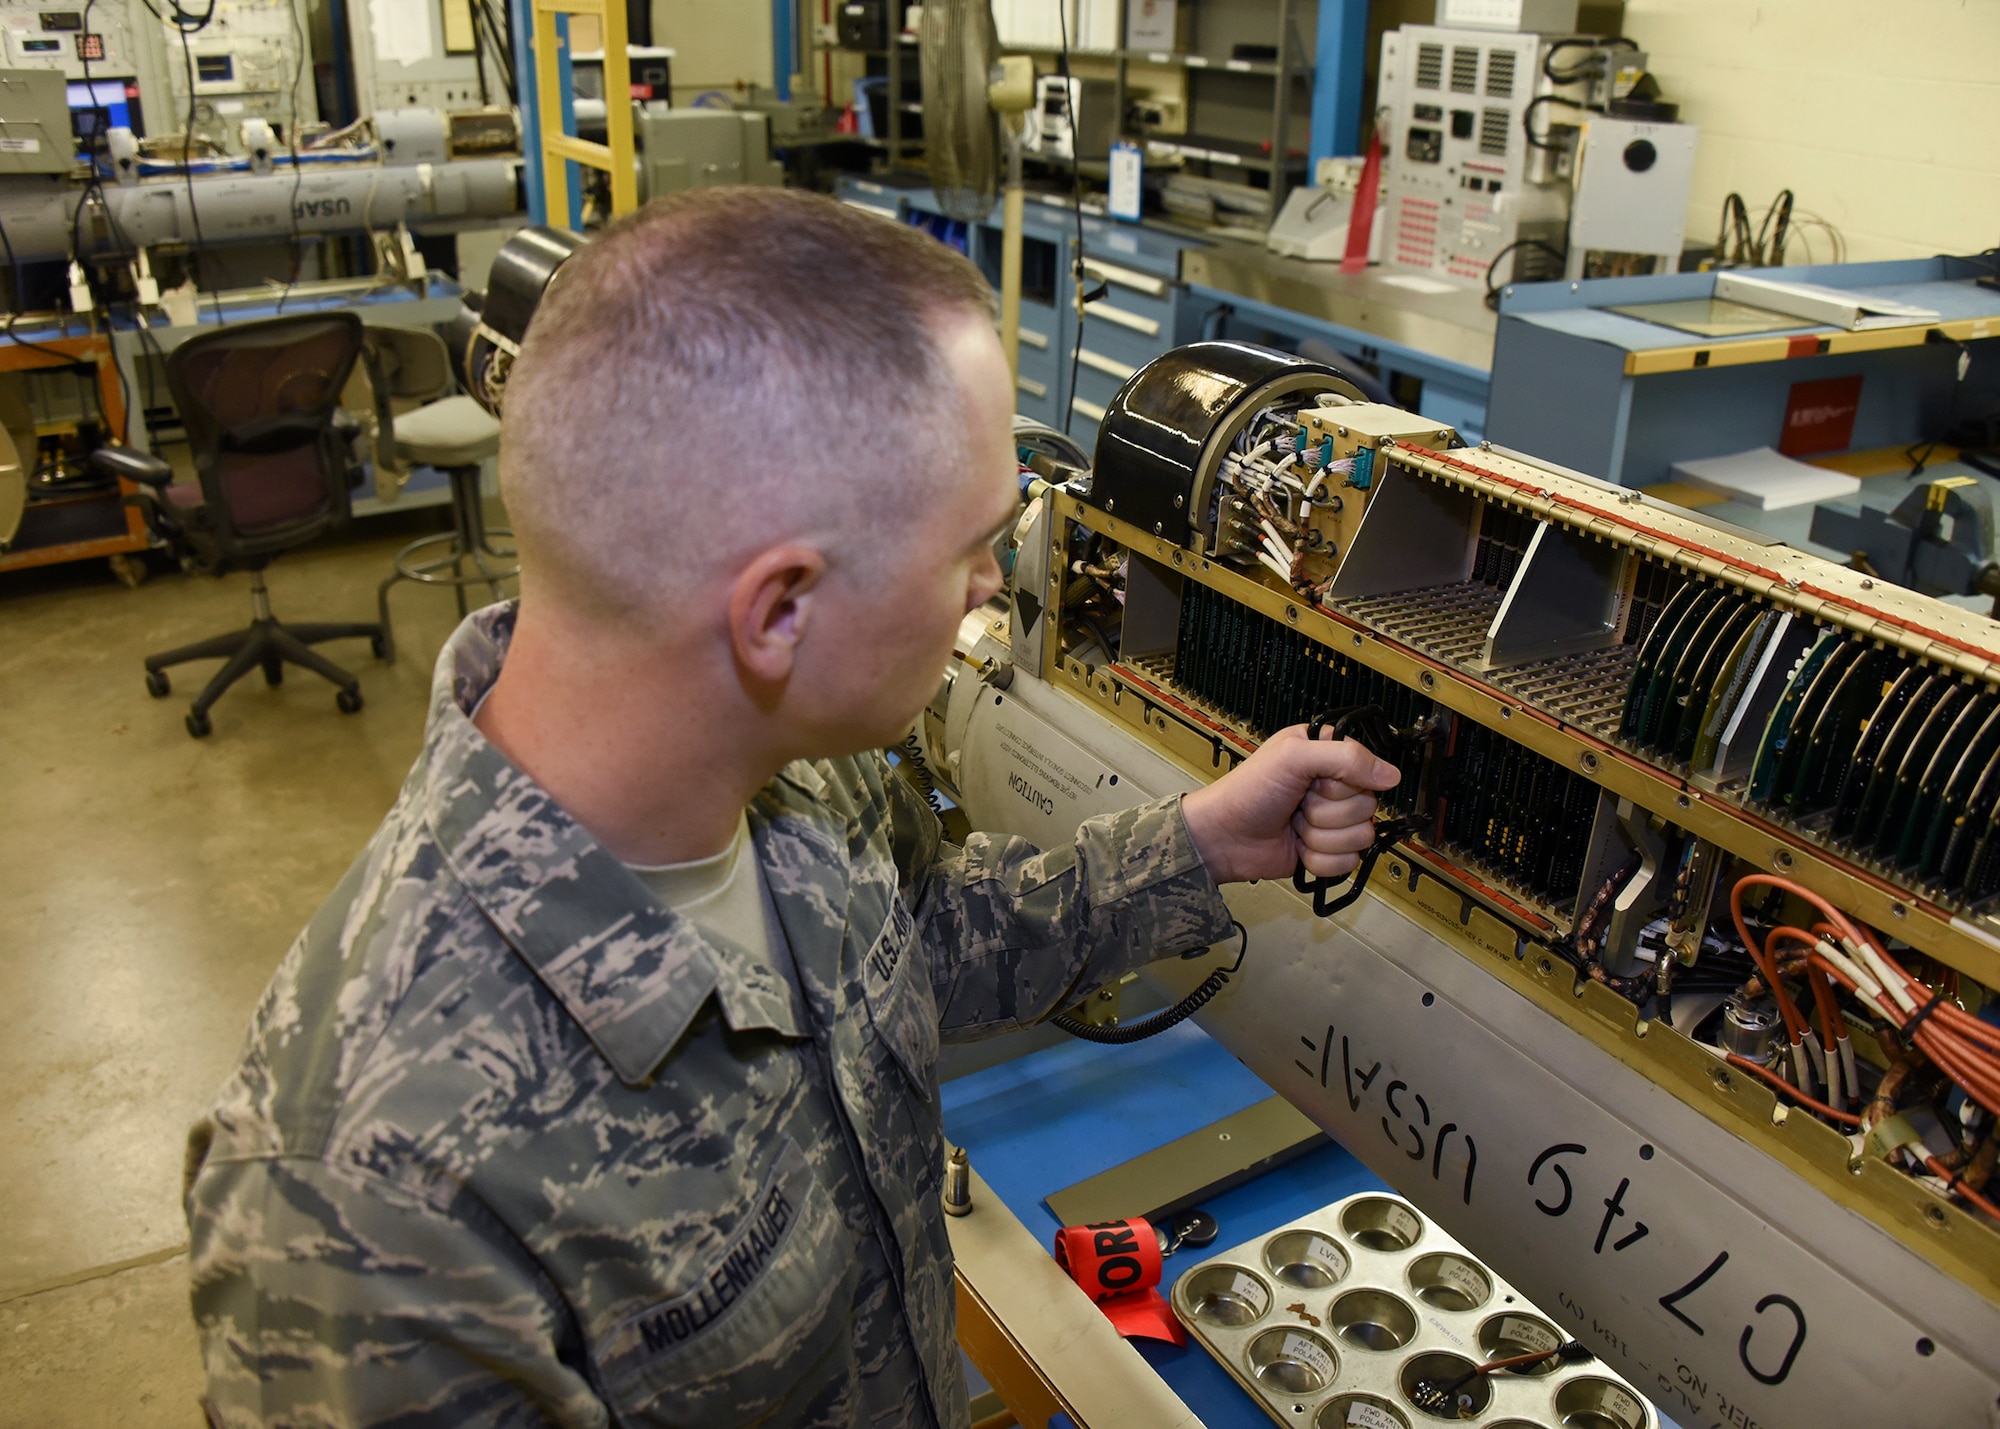 Tech. Sgt. Mollenhauer is replacing a printed wiring assembly on an electronic warfare pod Sept. 27, 2016 at Warfield Air National Guard Base, Middle River, Md. Mollenhauer is the Maryland Air National Guard October Spotlight Airman. (U.S. Air National Guard photo by Airman 1st Class Enjoli Saunders/RELEASED)